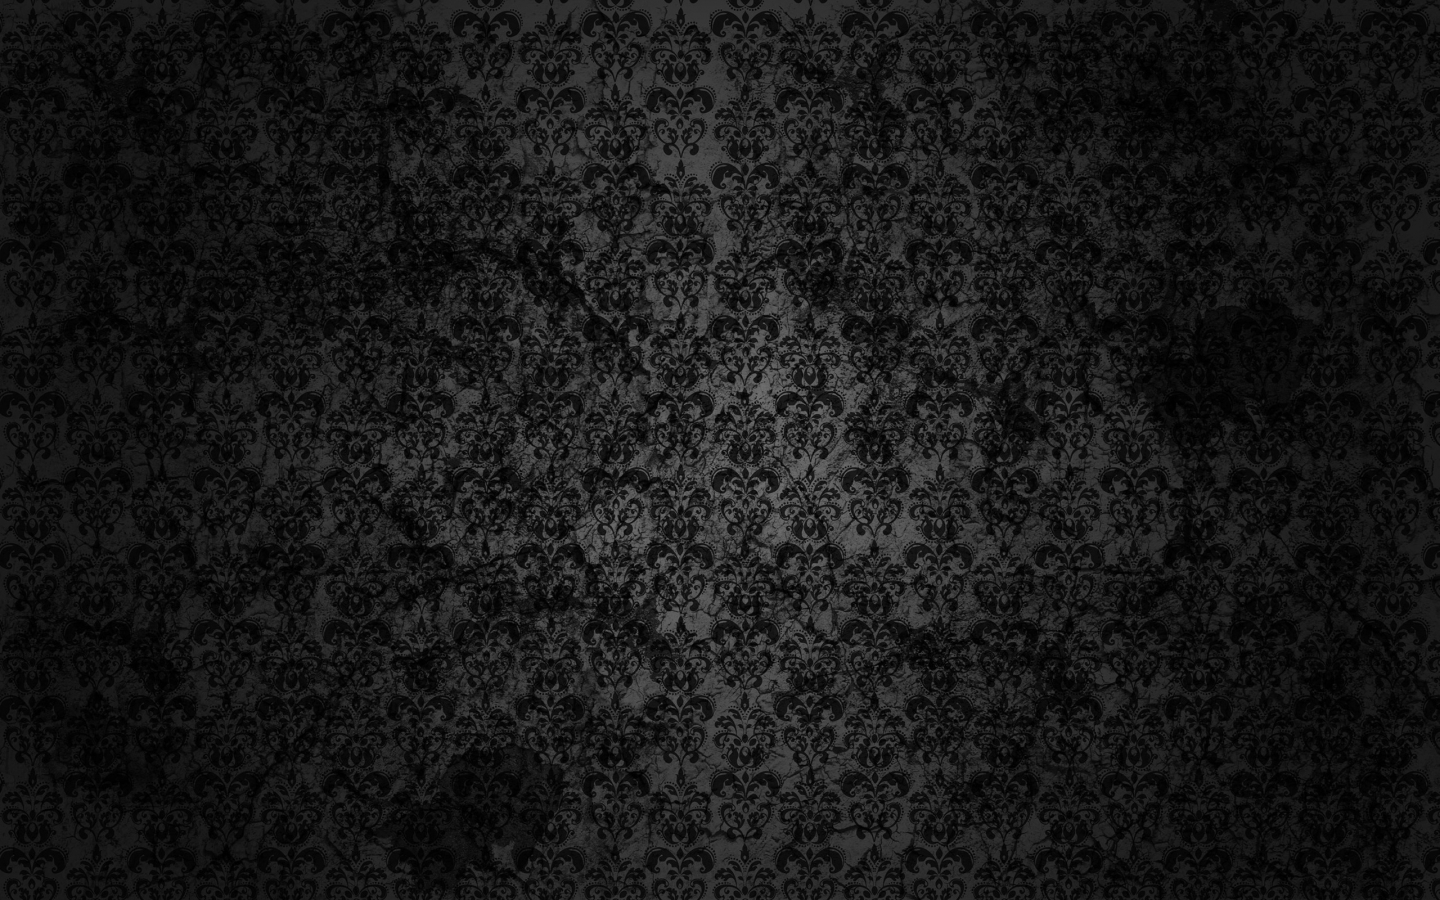 Black Floral Grunge for 1440 x 900 widescreen resolution